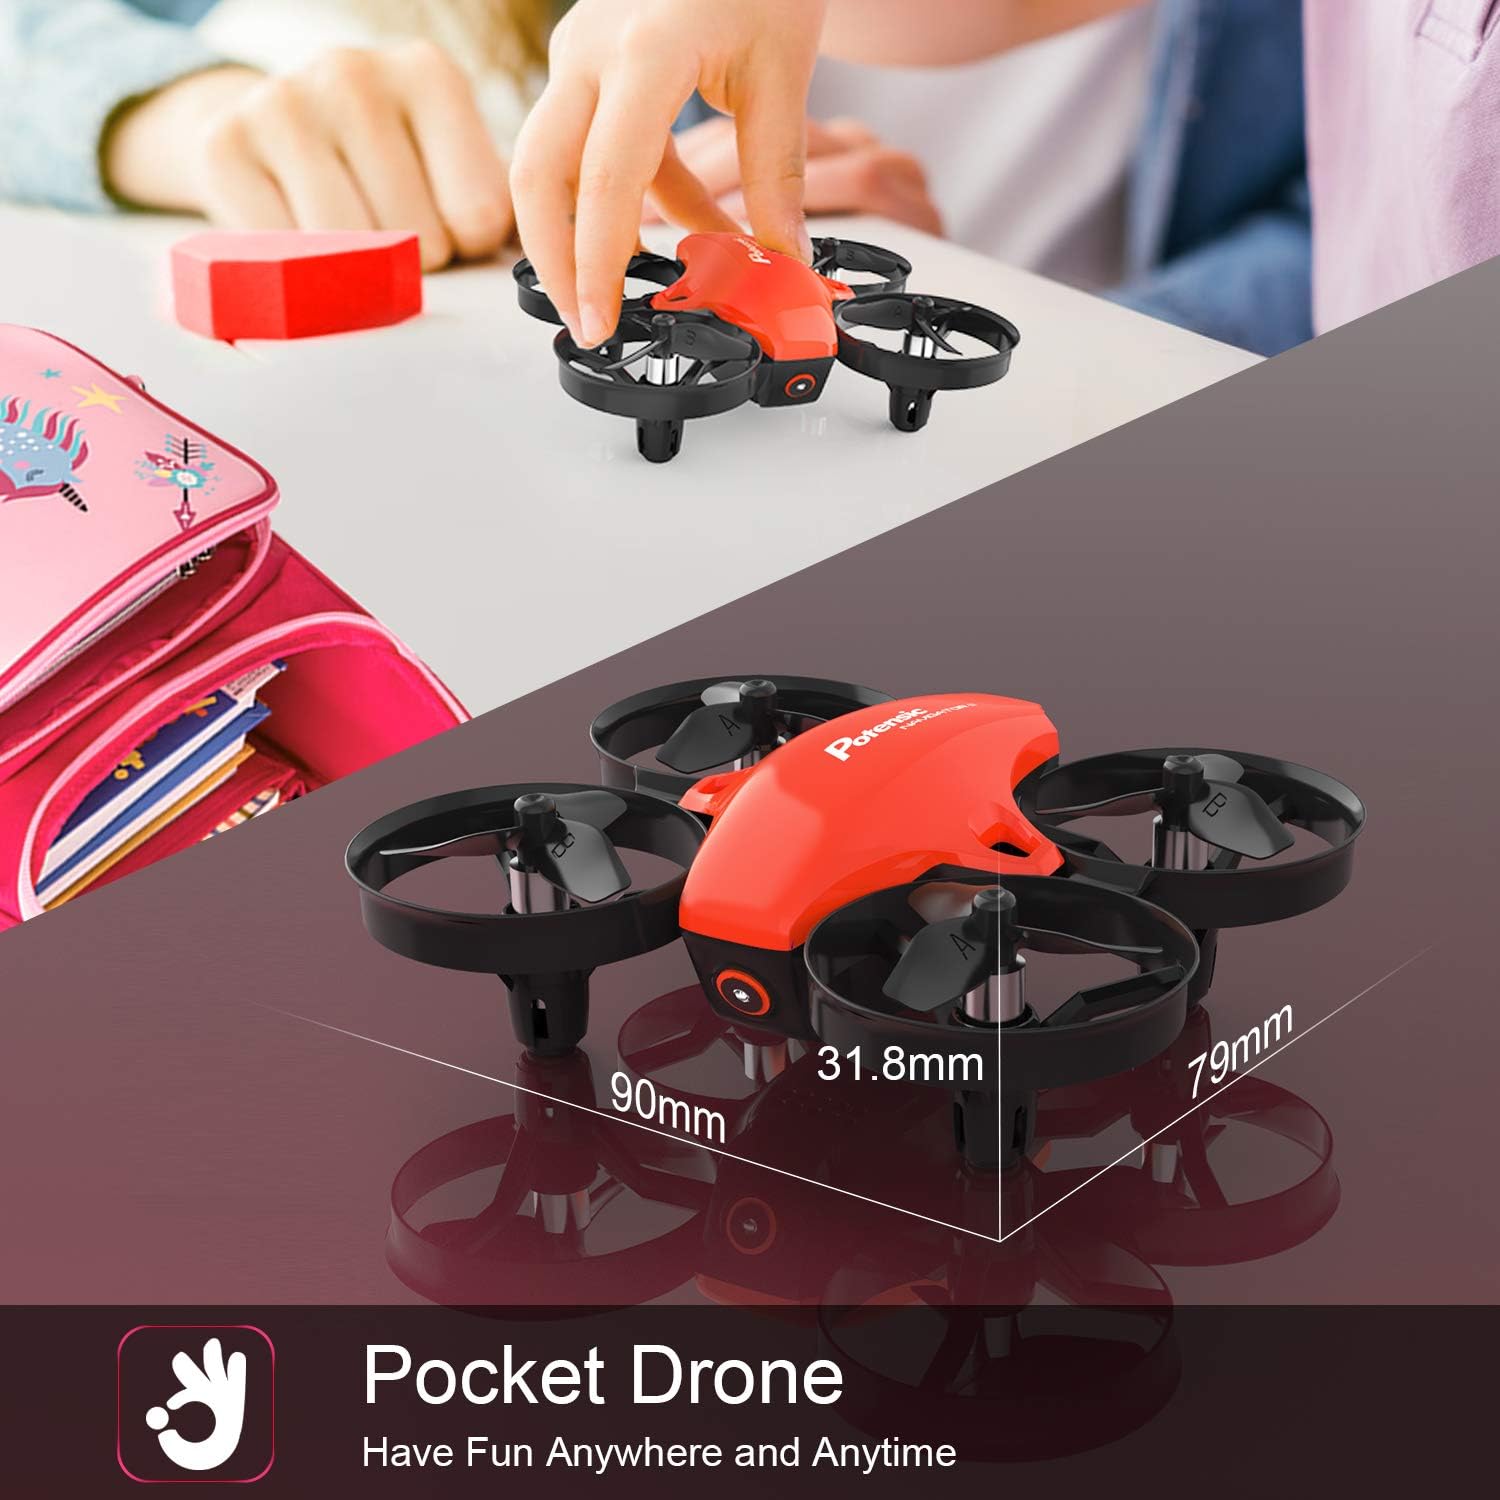 Potensic A20 Red Mini Drone Easy to Fly Helicopter for Kids – Kids Toys